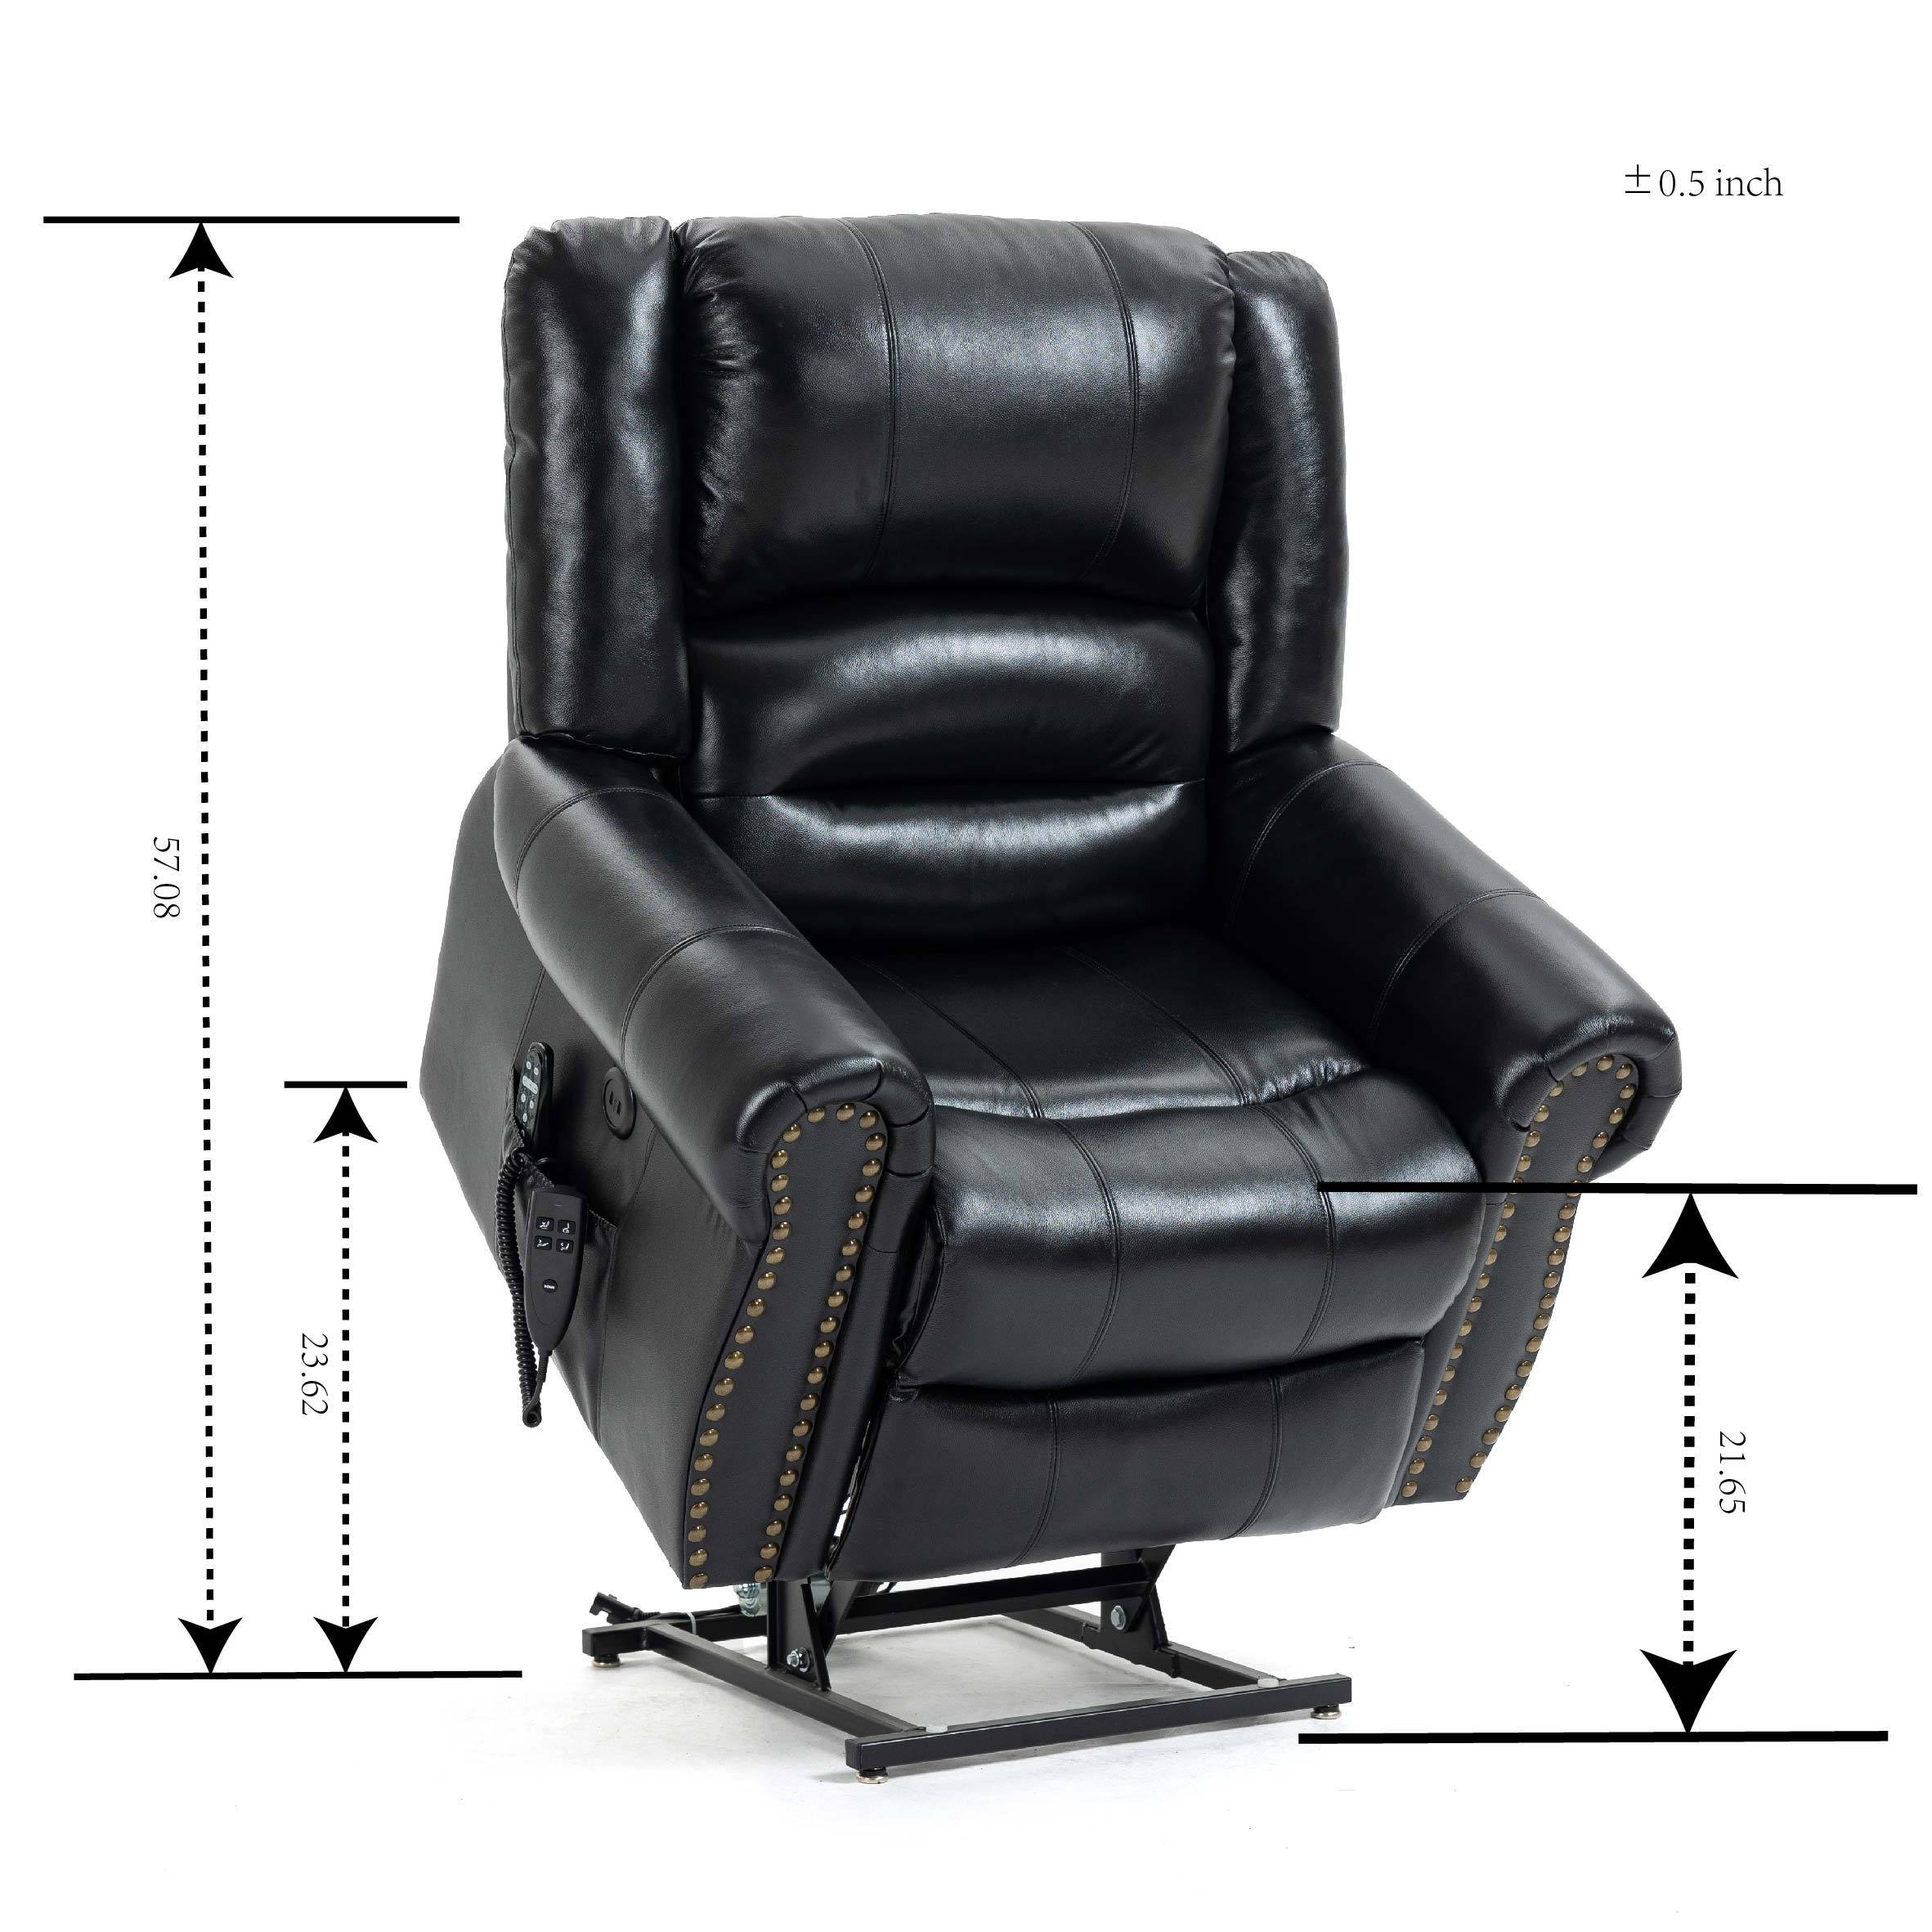 Genuine Leather Power Lift Recliner Chair with Heat, Massage and Infinite Positioning, raised dimensions